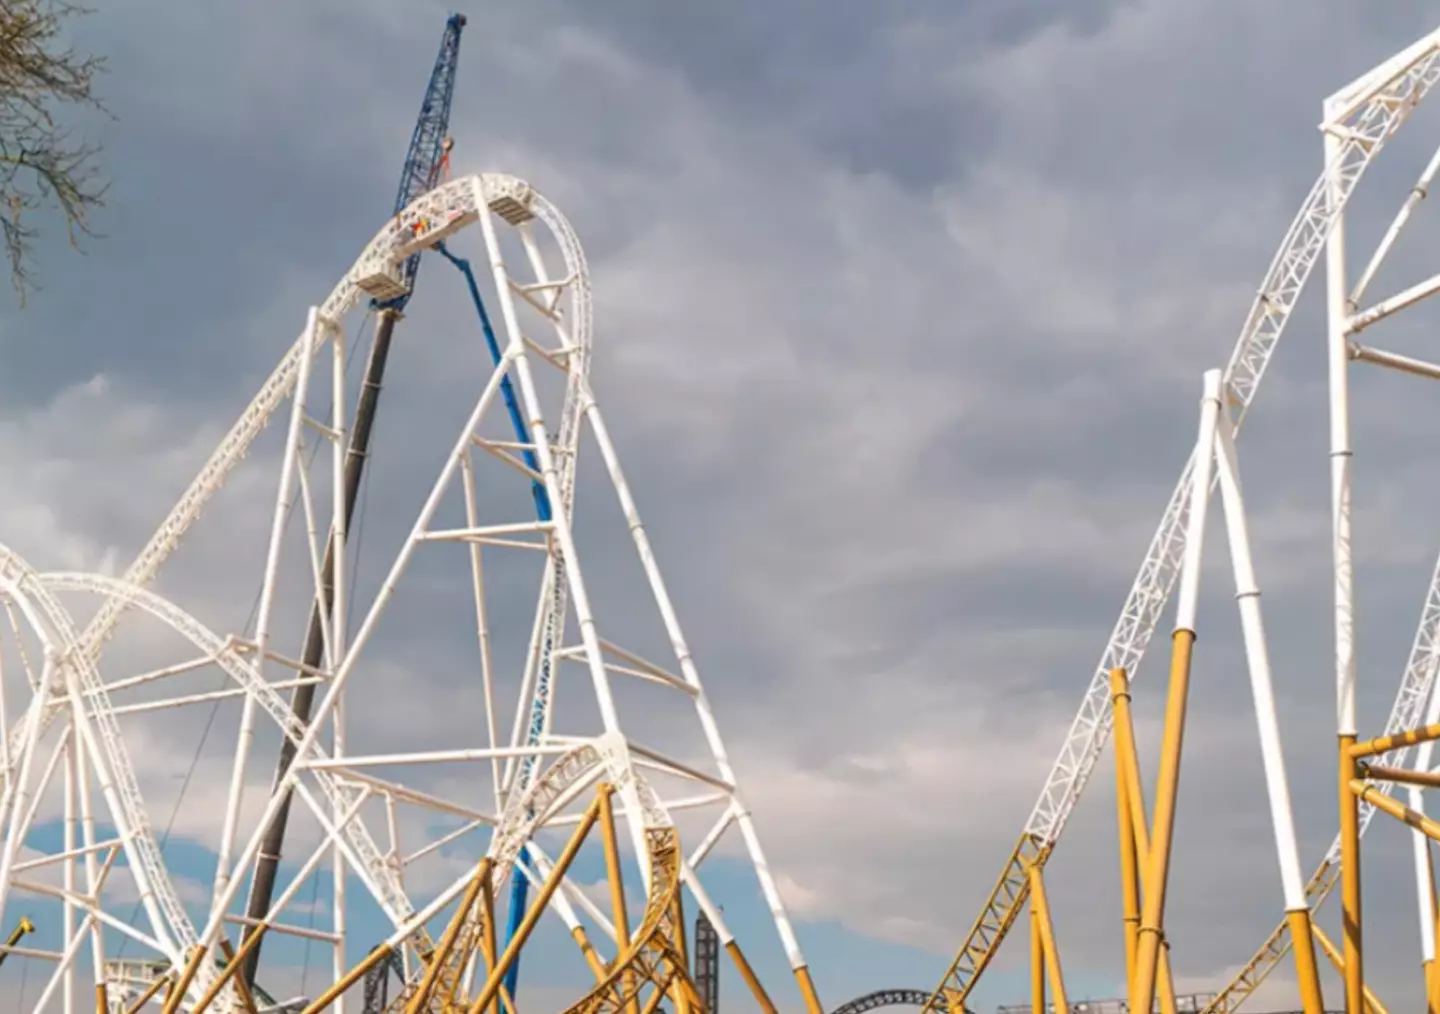 The rollercoaster will be open to the public on 24 May.